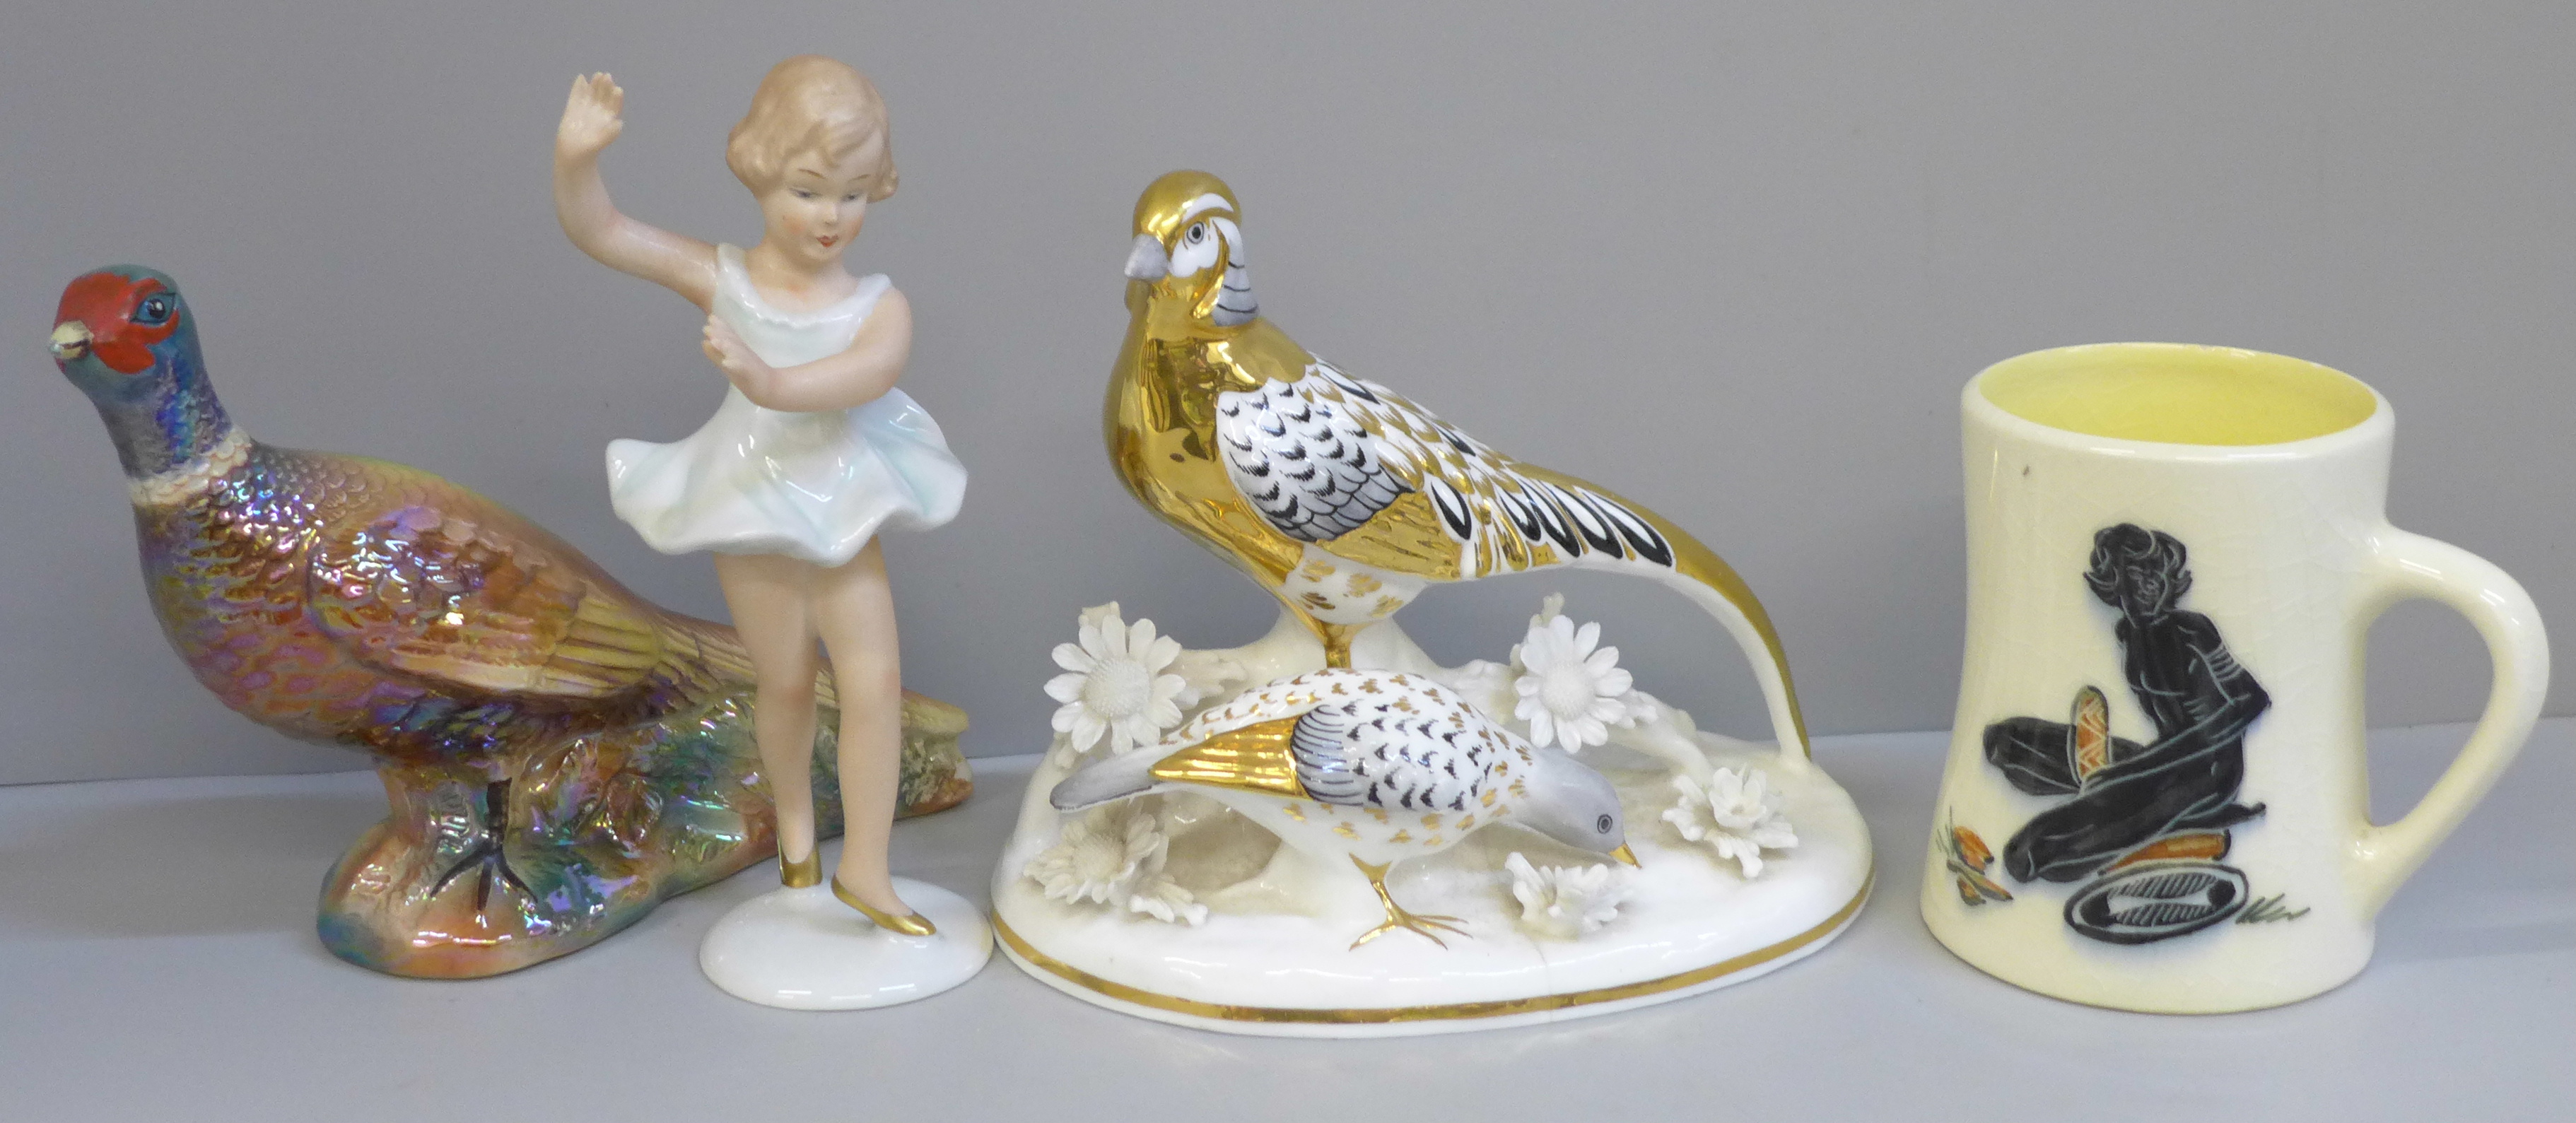 A KSP model of a pheasant, a small German porcelain figure of a dancer, a Staffordshire figure of